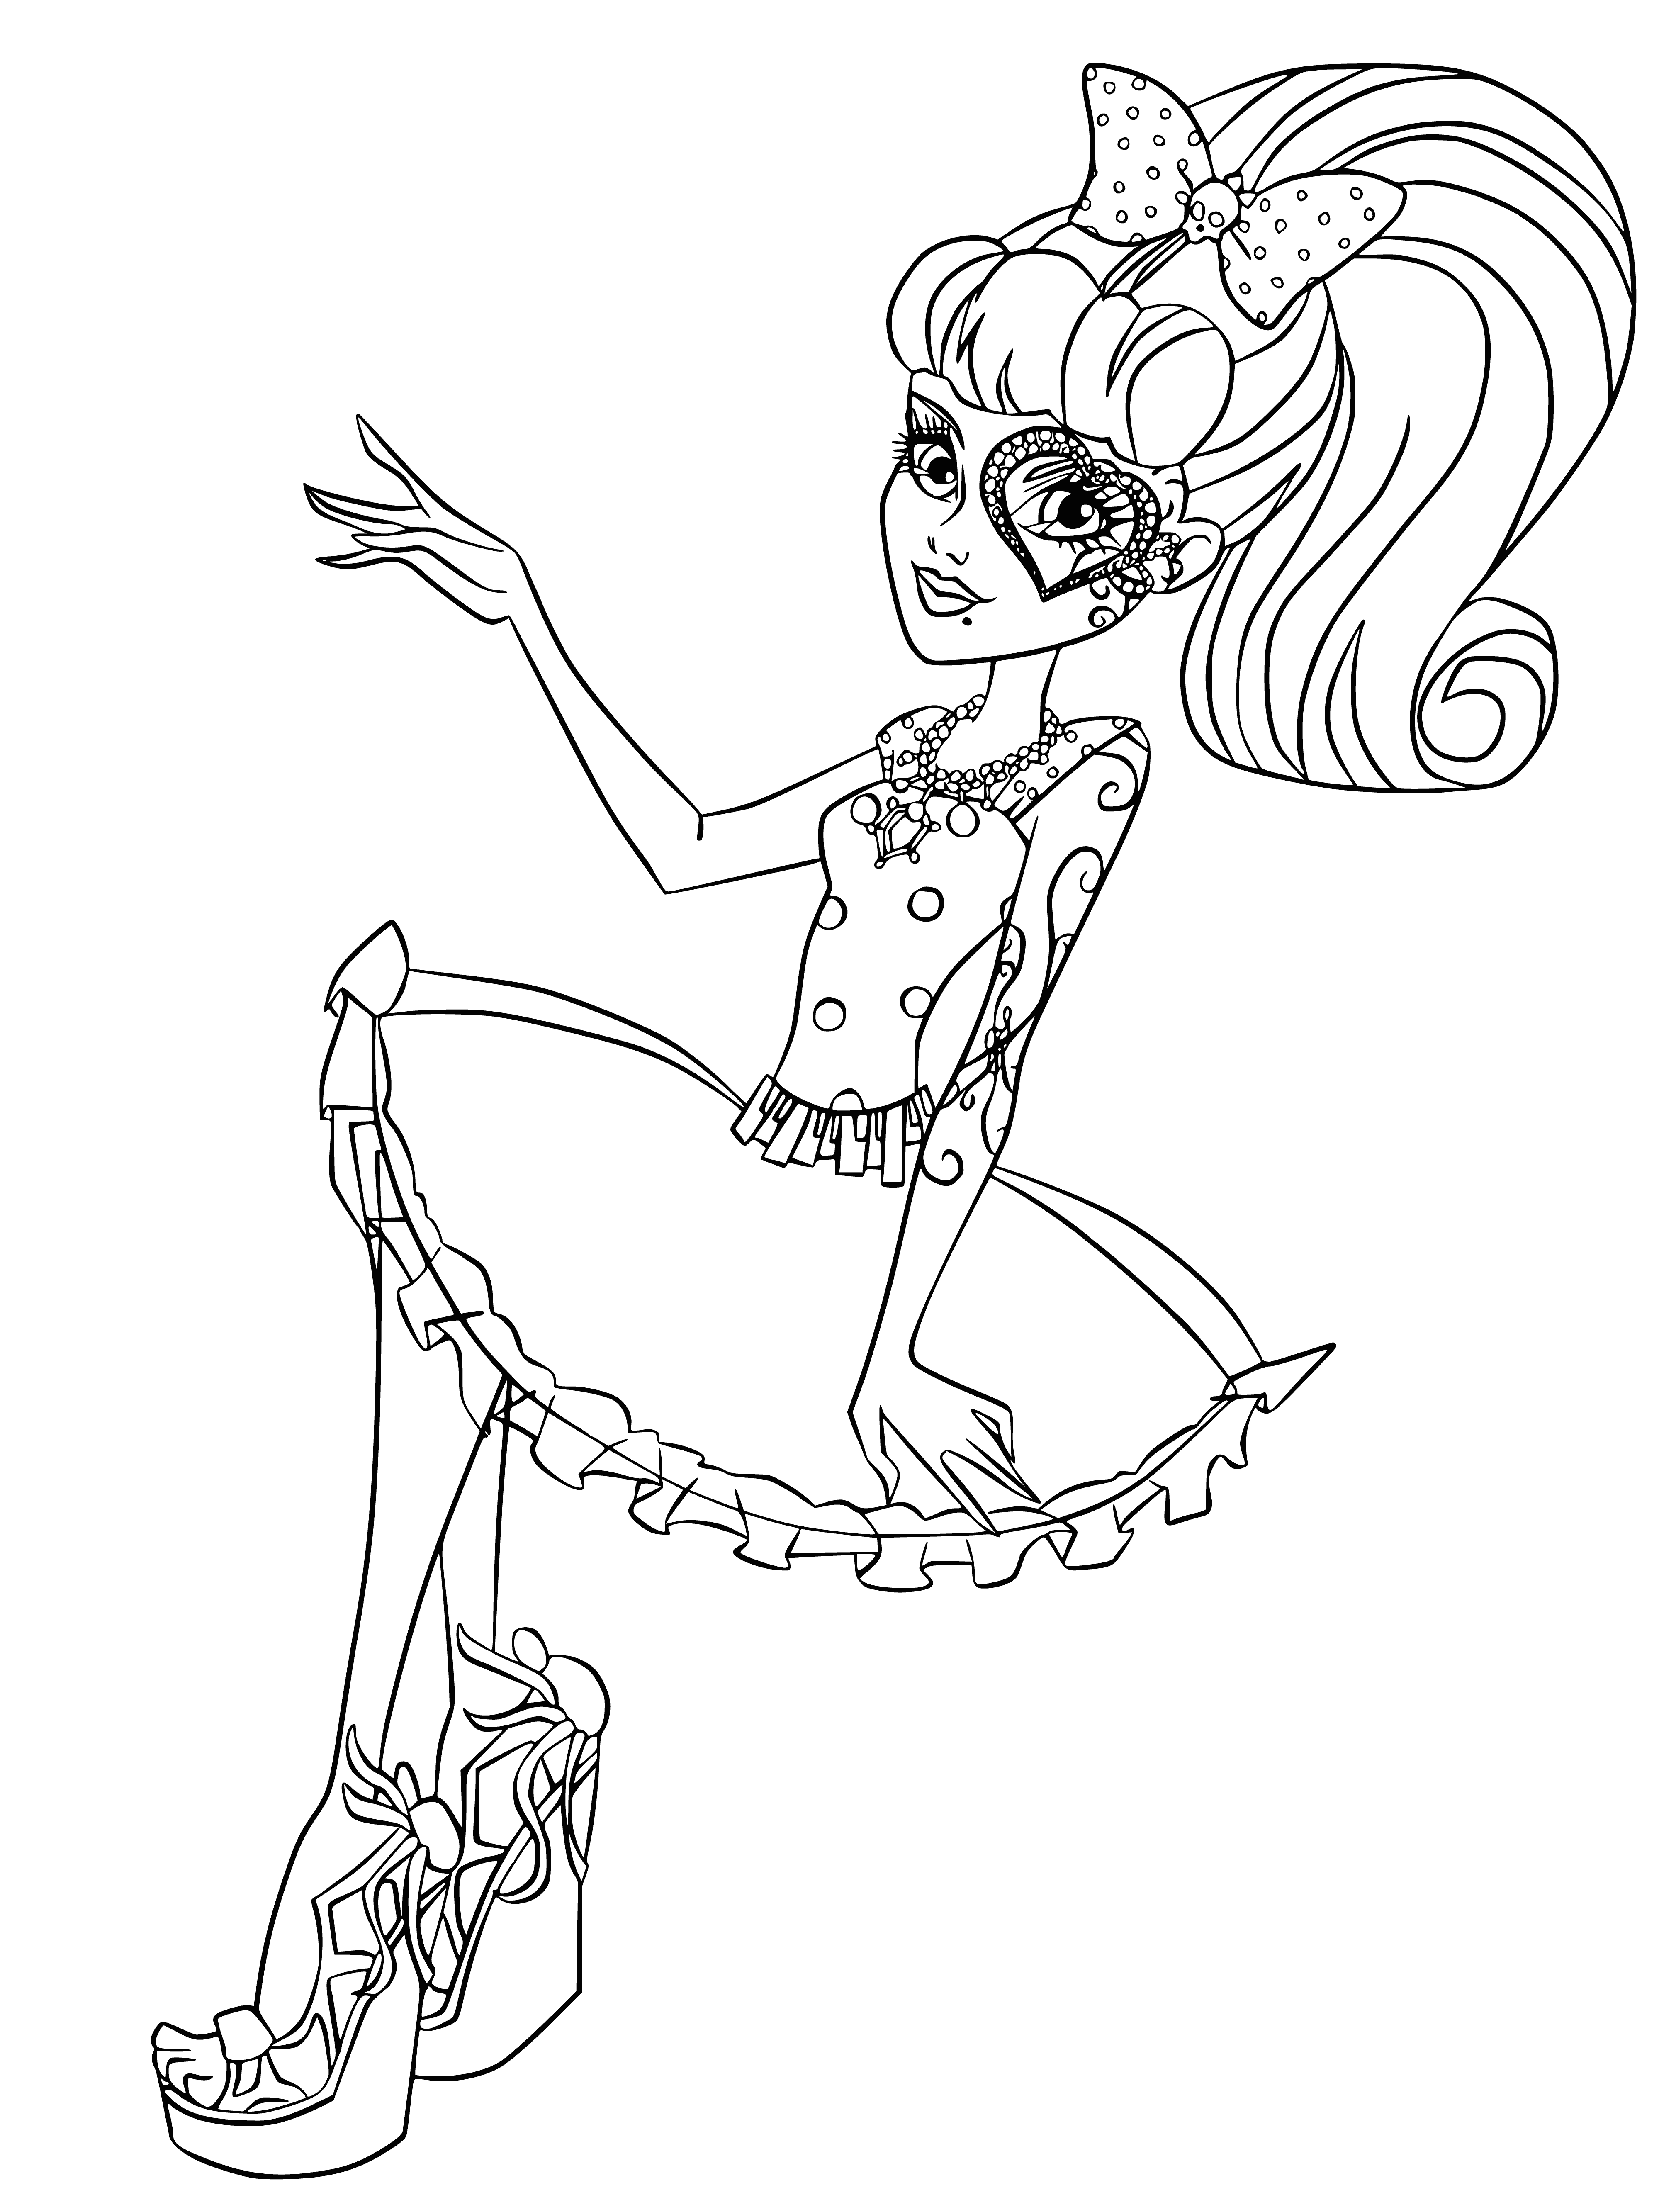 coloring page: Operetta is a light-hearted type of musical theatre combining elements of opera & musical comedy, characterized by catchy, humorous tunes & romantic themes.